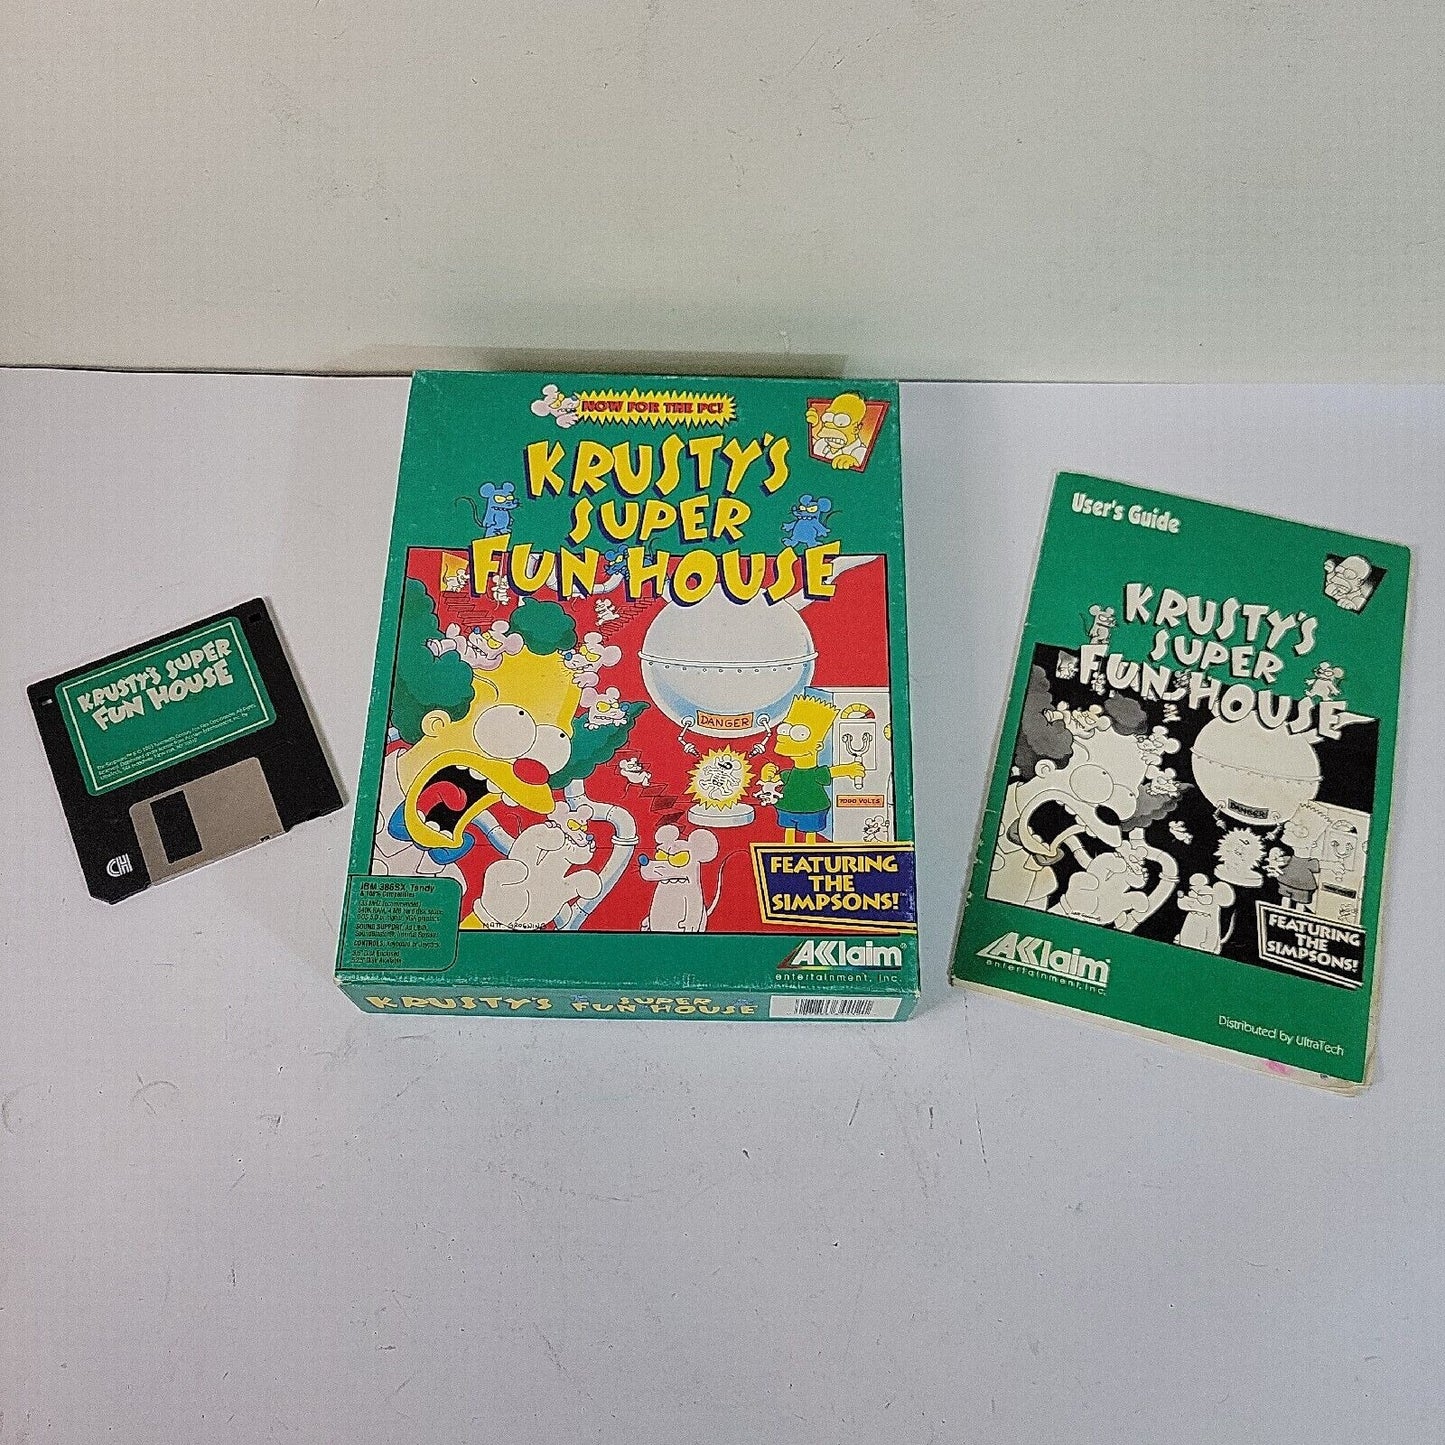 Krusty's Super Fun House 1993 Simpsons 3.5" PC Computer Diskette Game